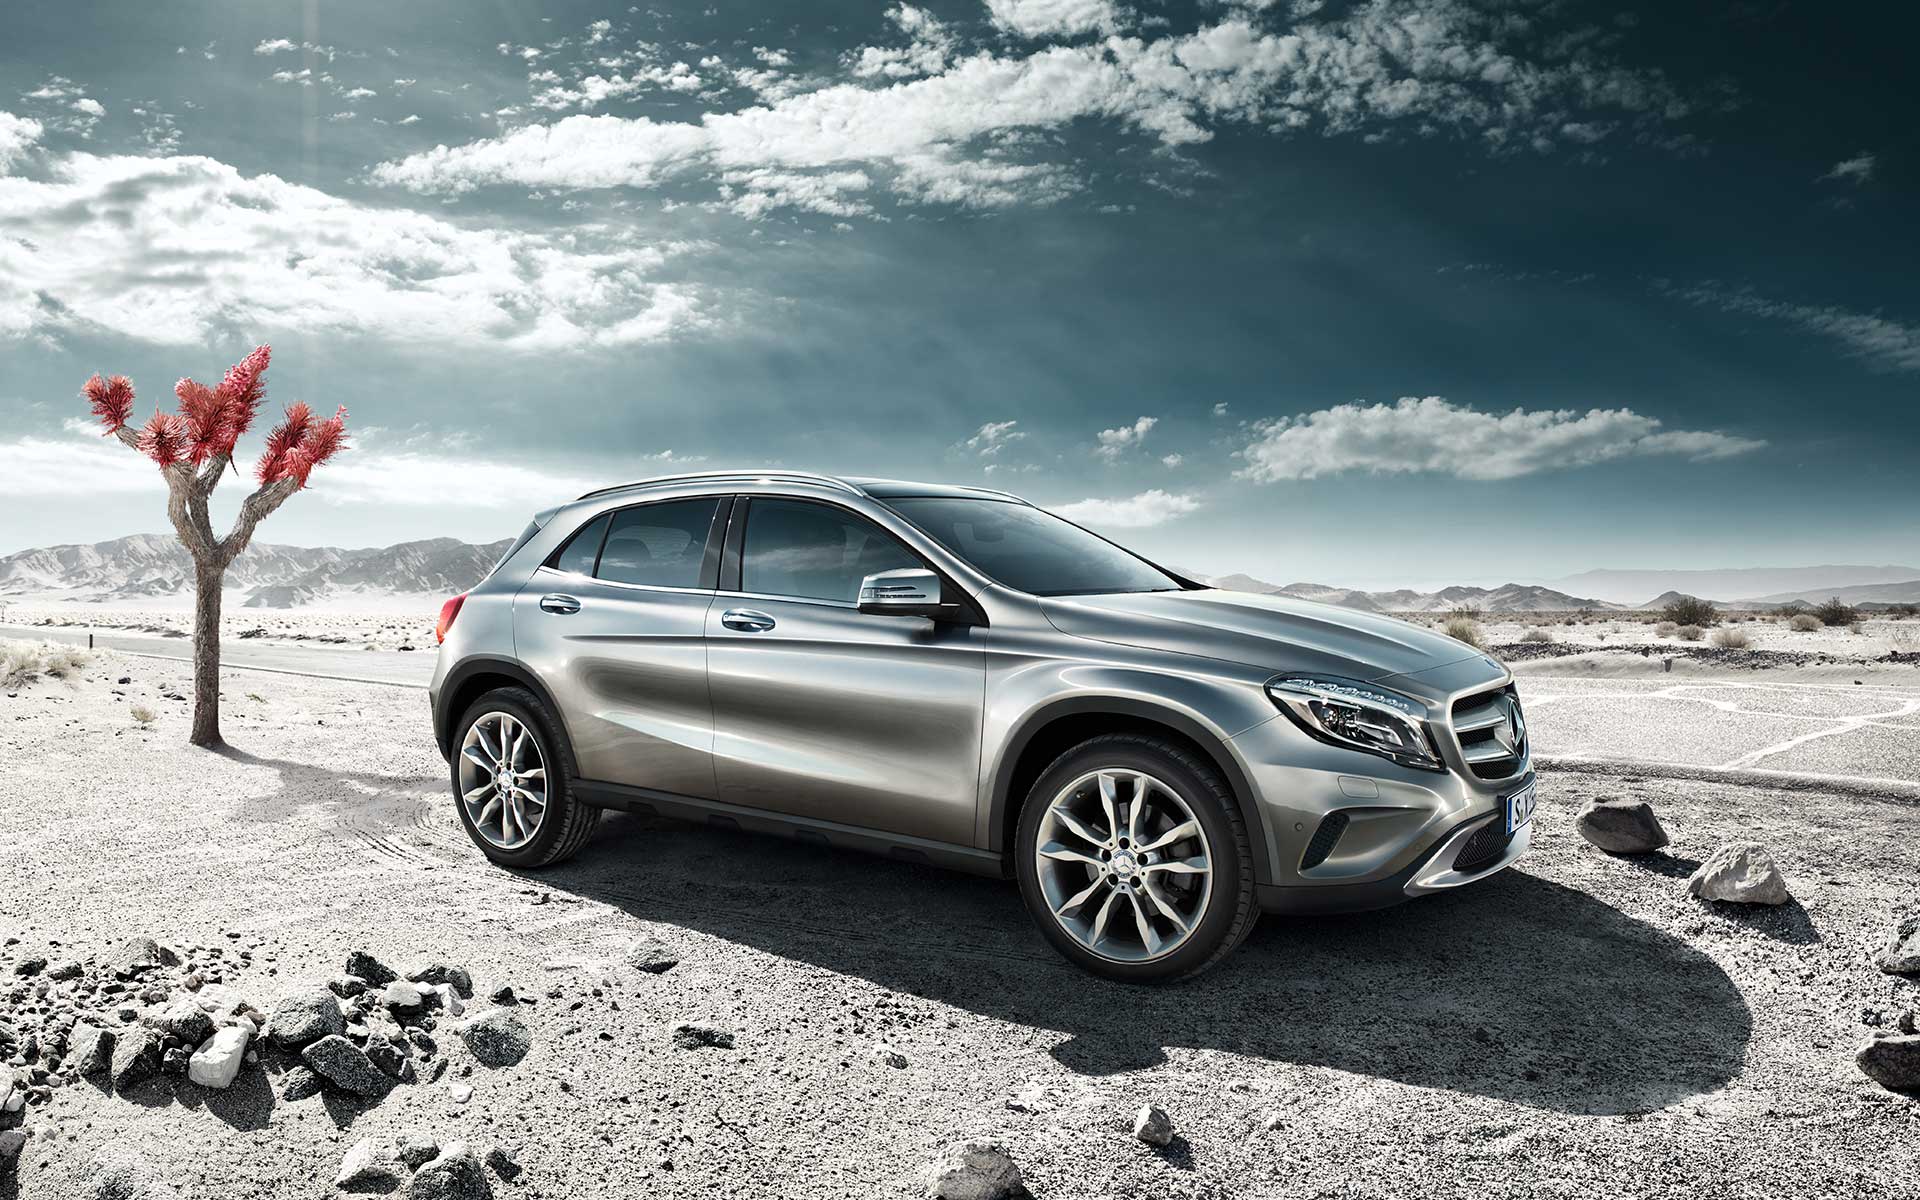 Mercedes Benz Gla Launched